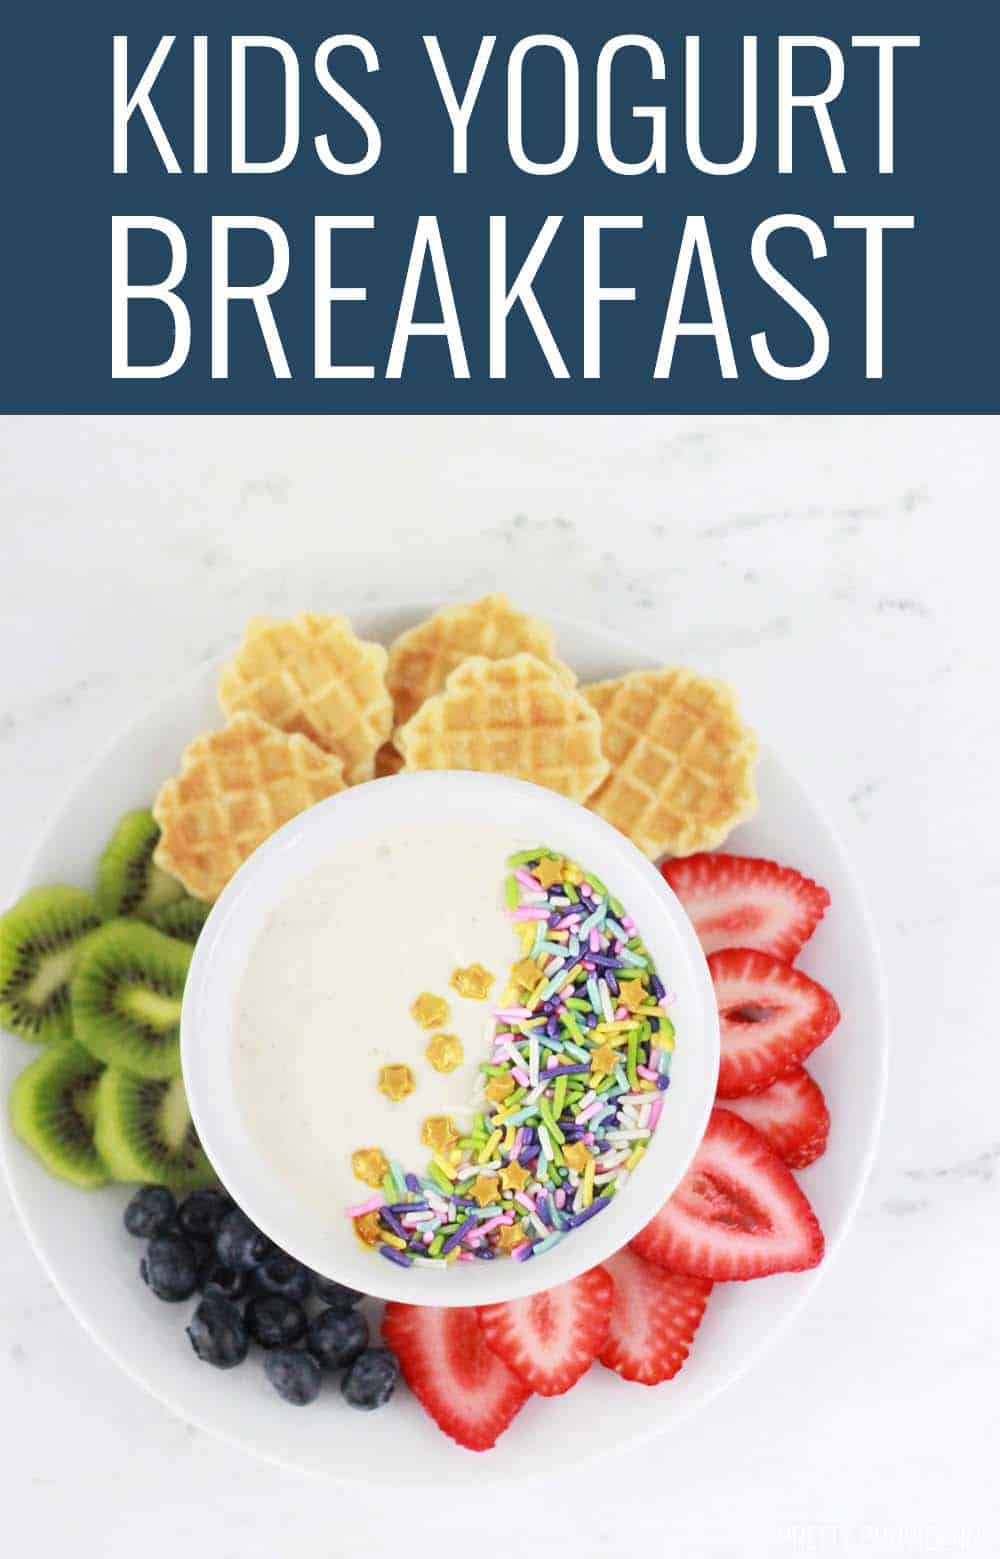 How to get picky eaters to eat - yogurt with sprinkles!